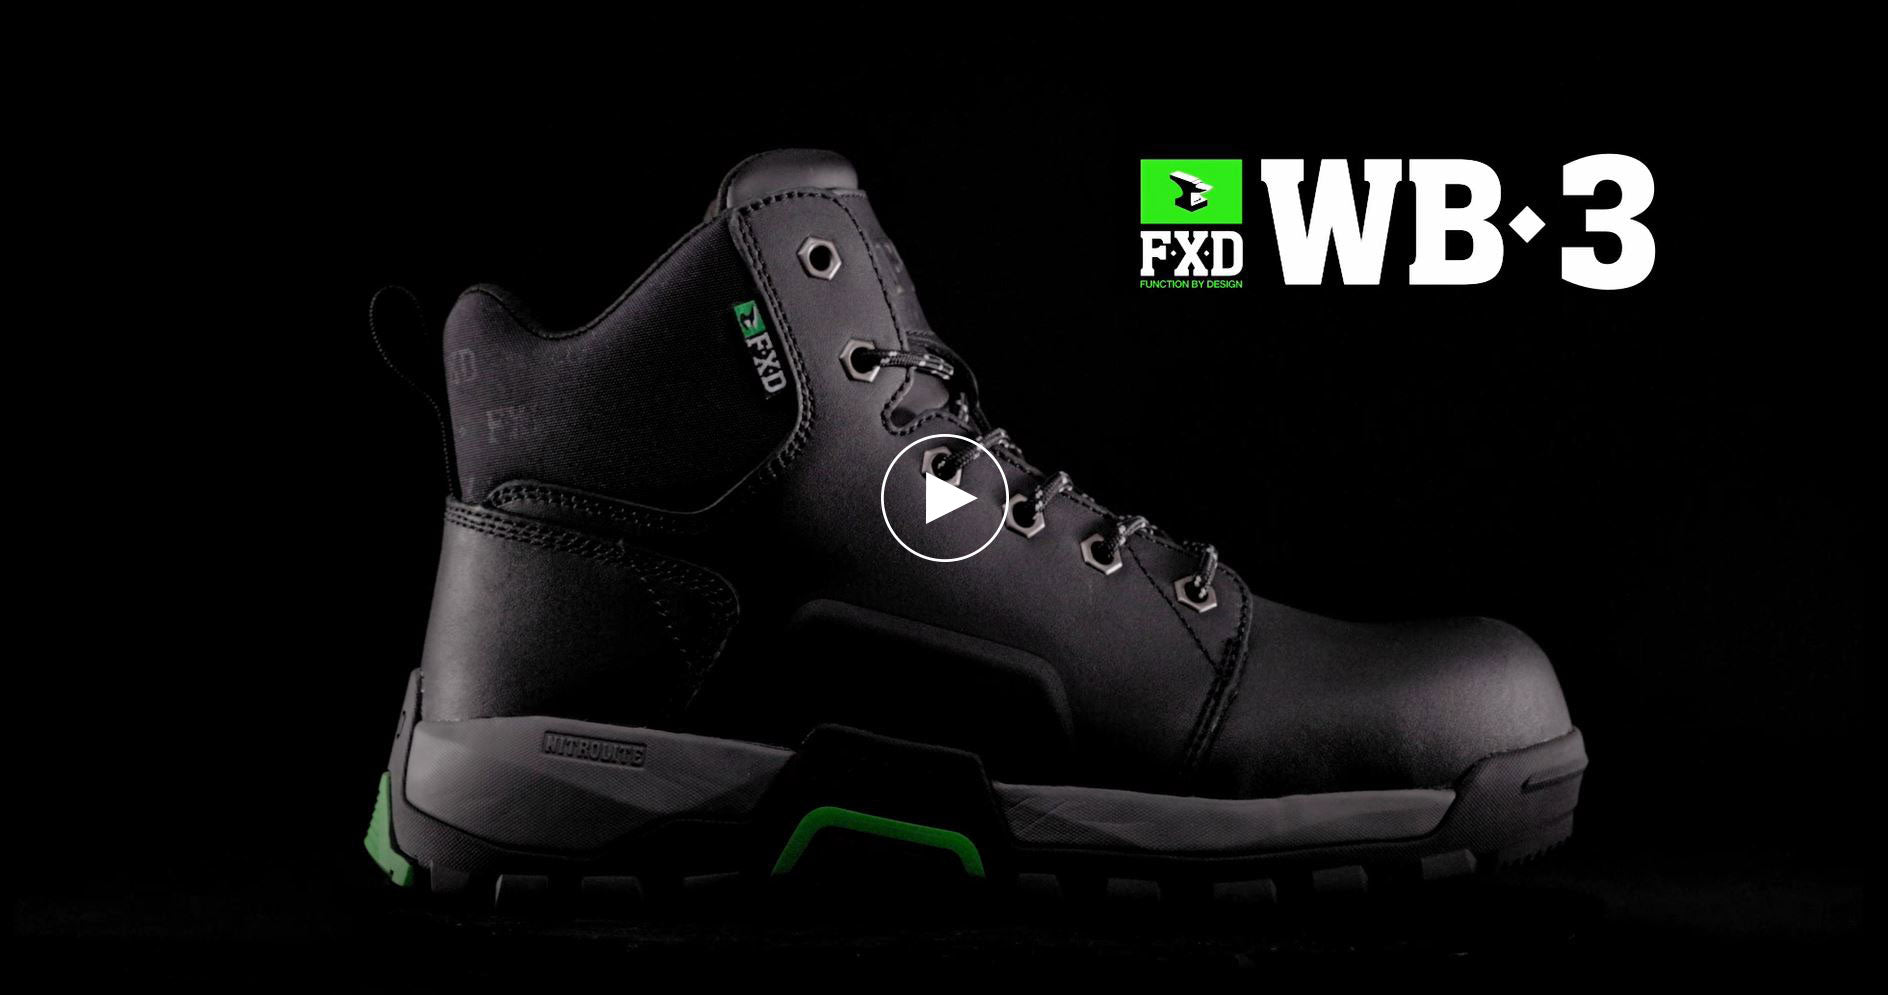 Load video: WB.3 Premium leather Boot Video